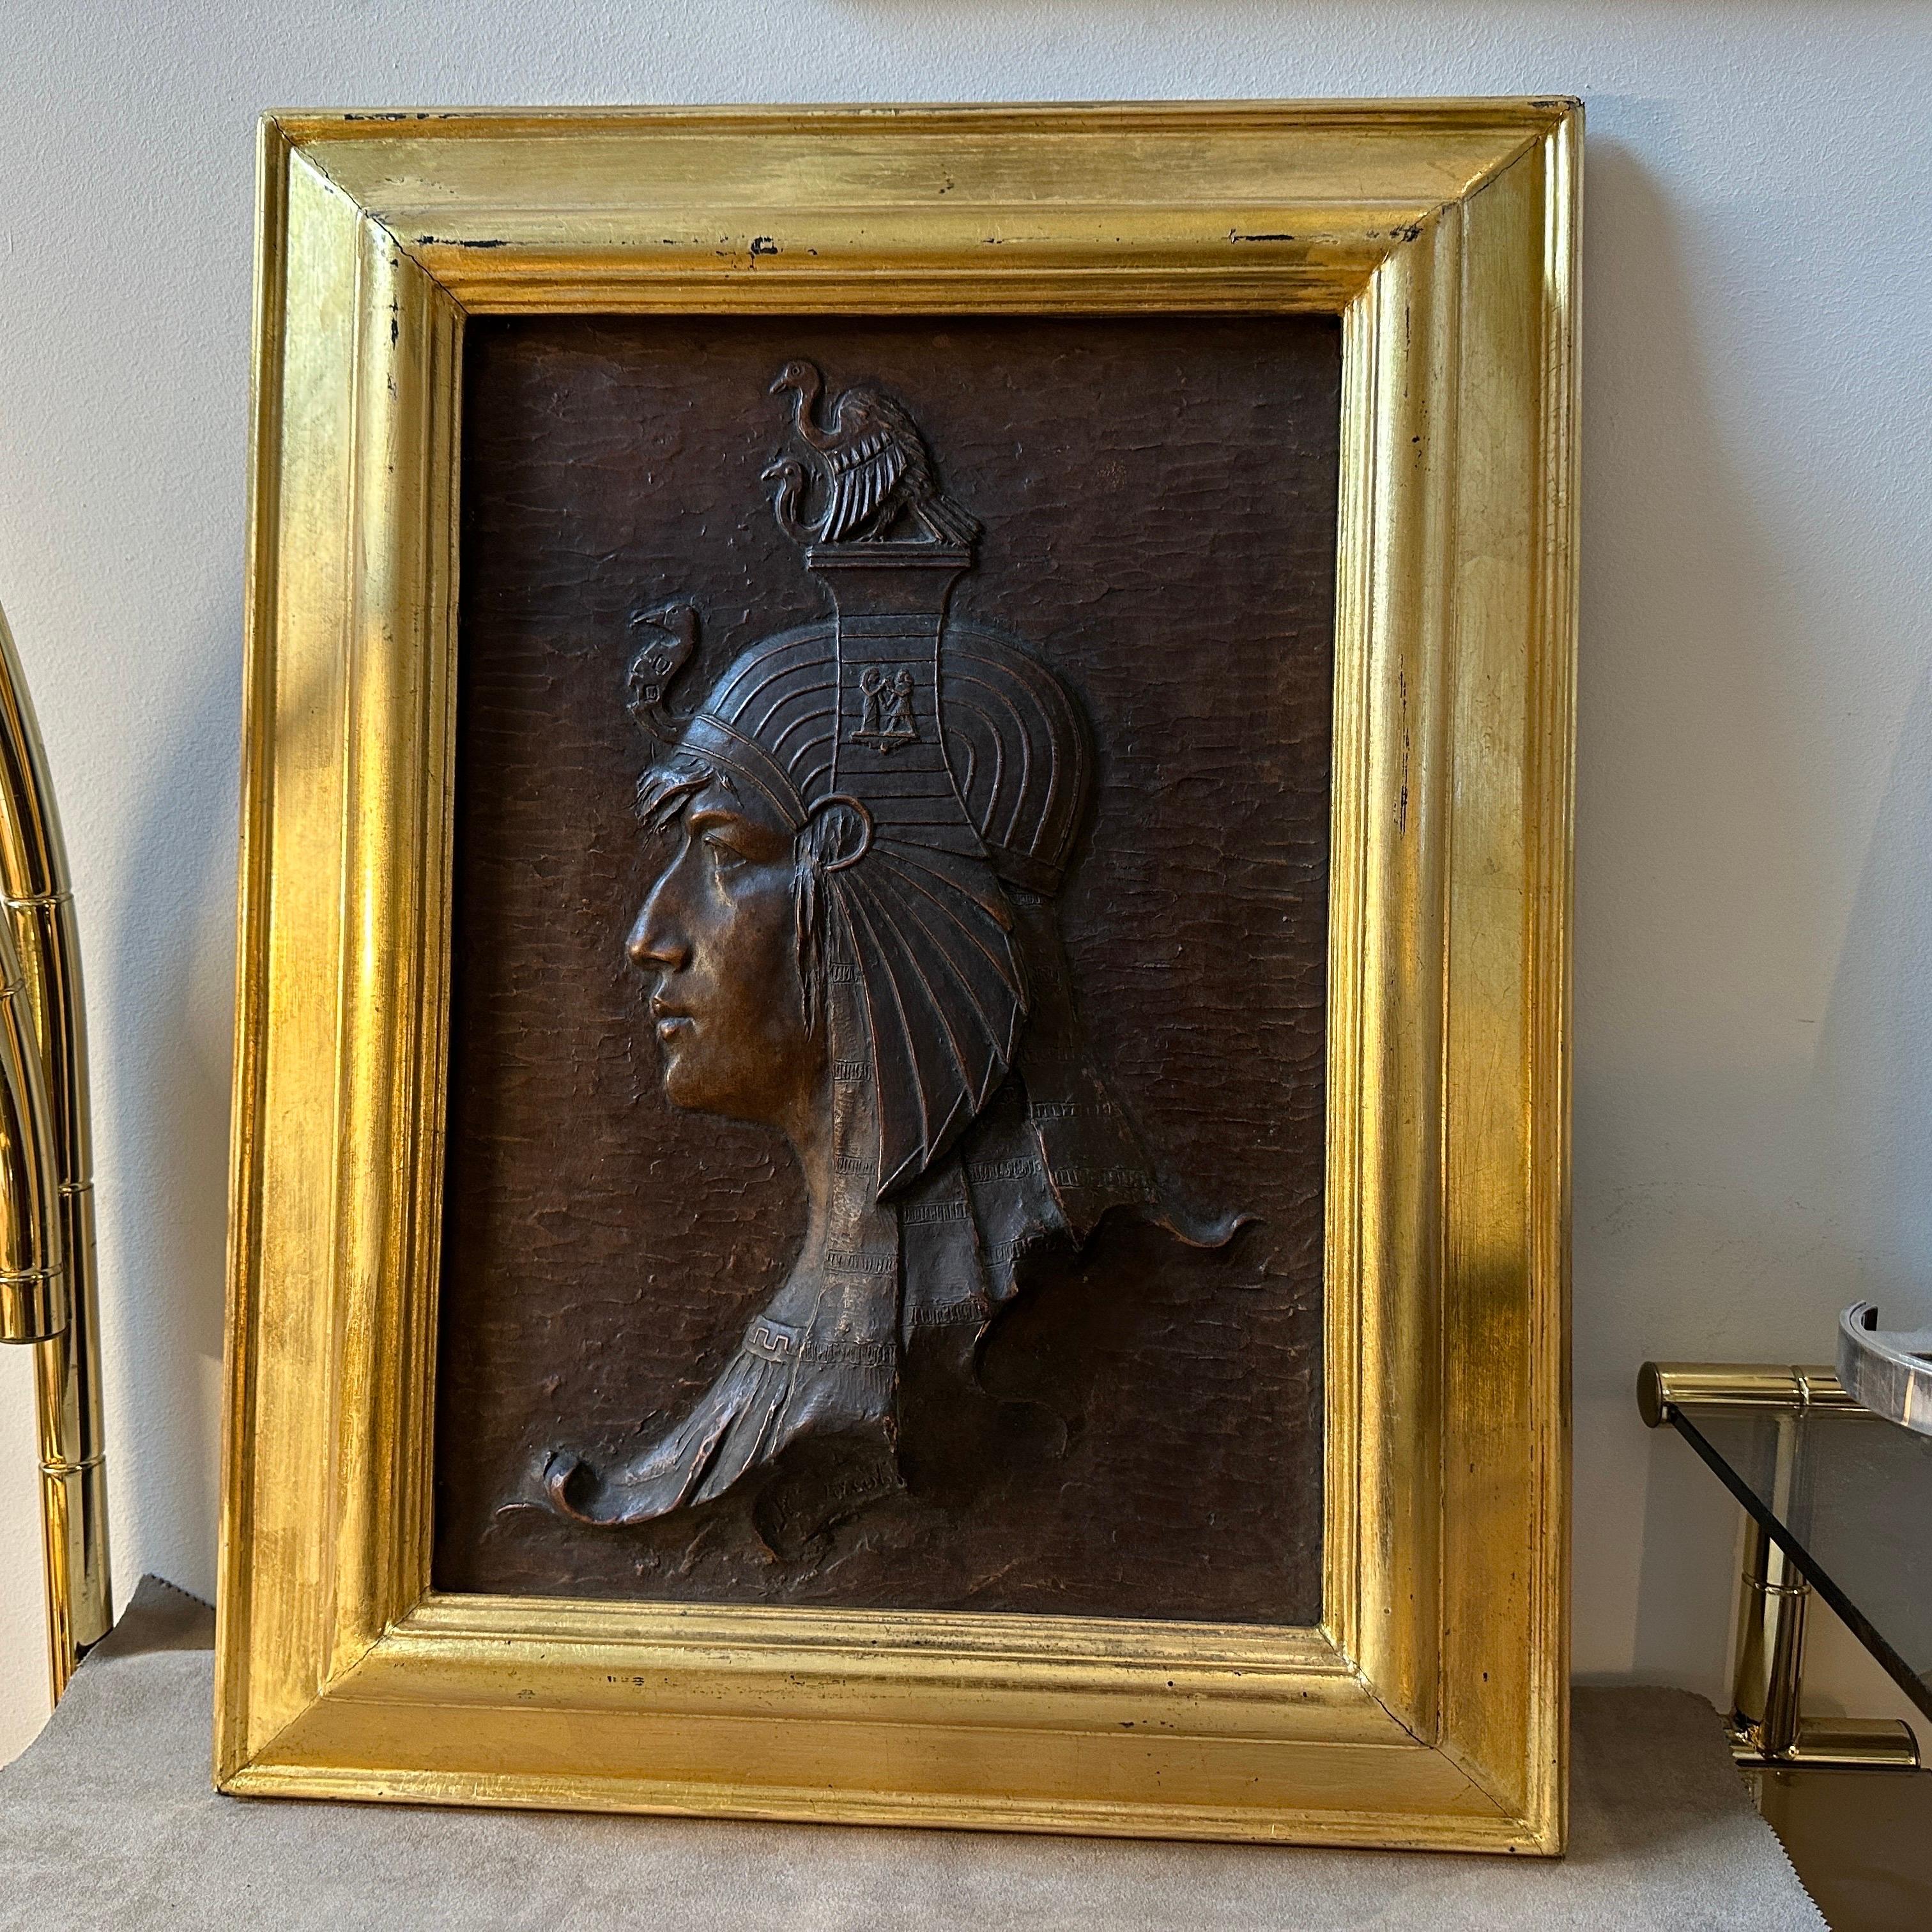 An Art Deco gilded wood framed Bas-Relief Plaster depicting an antique Egyptian hand-crafted in Italy in the Thirties which represents a stunning fusion of artistic influences and craftsmanship from the early 20th century. This particular piece